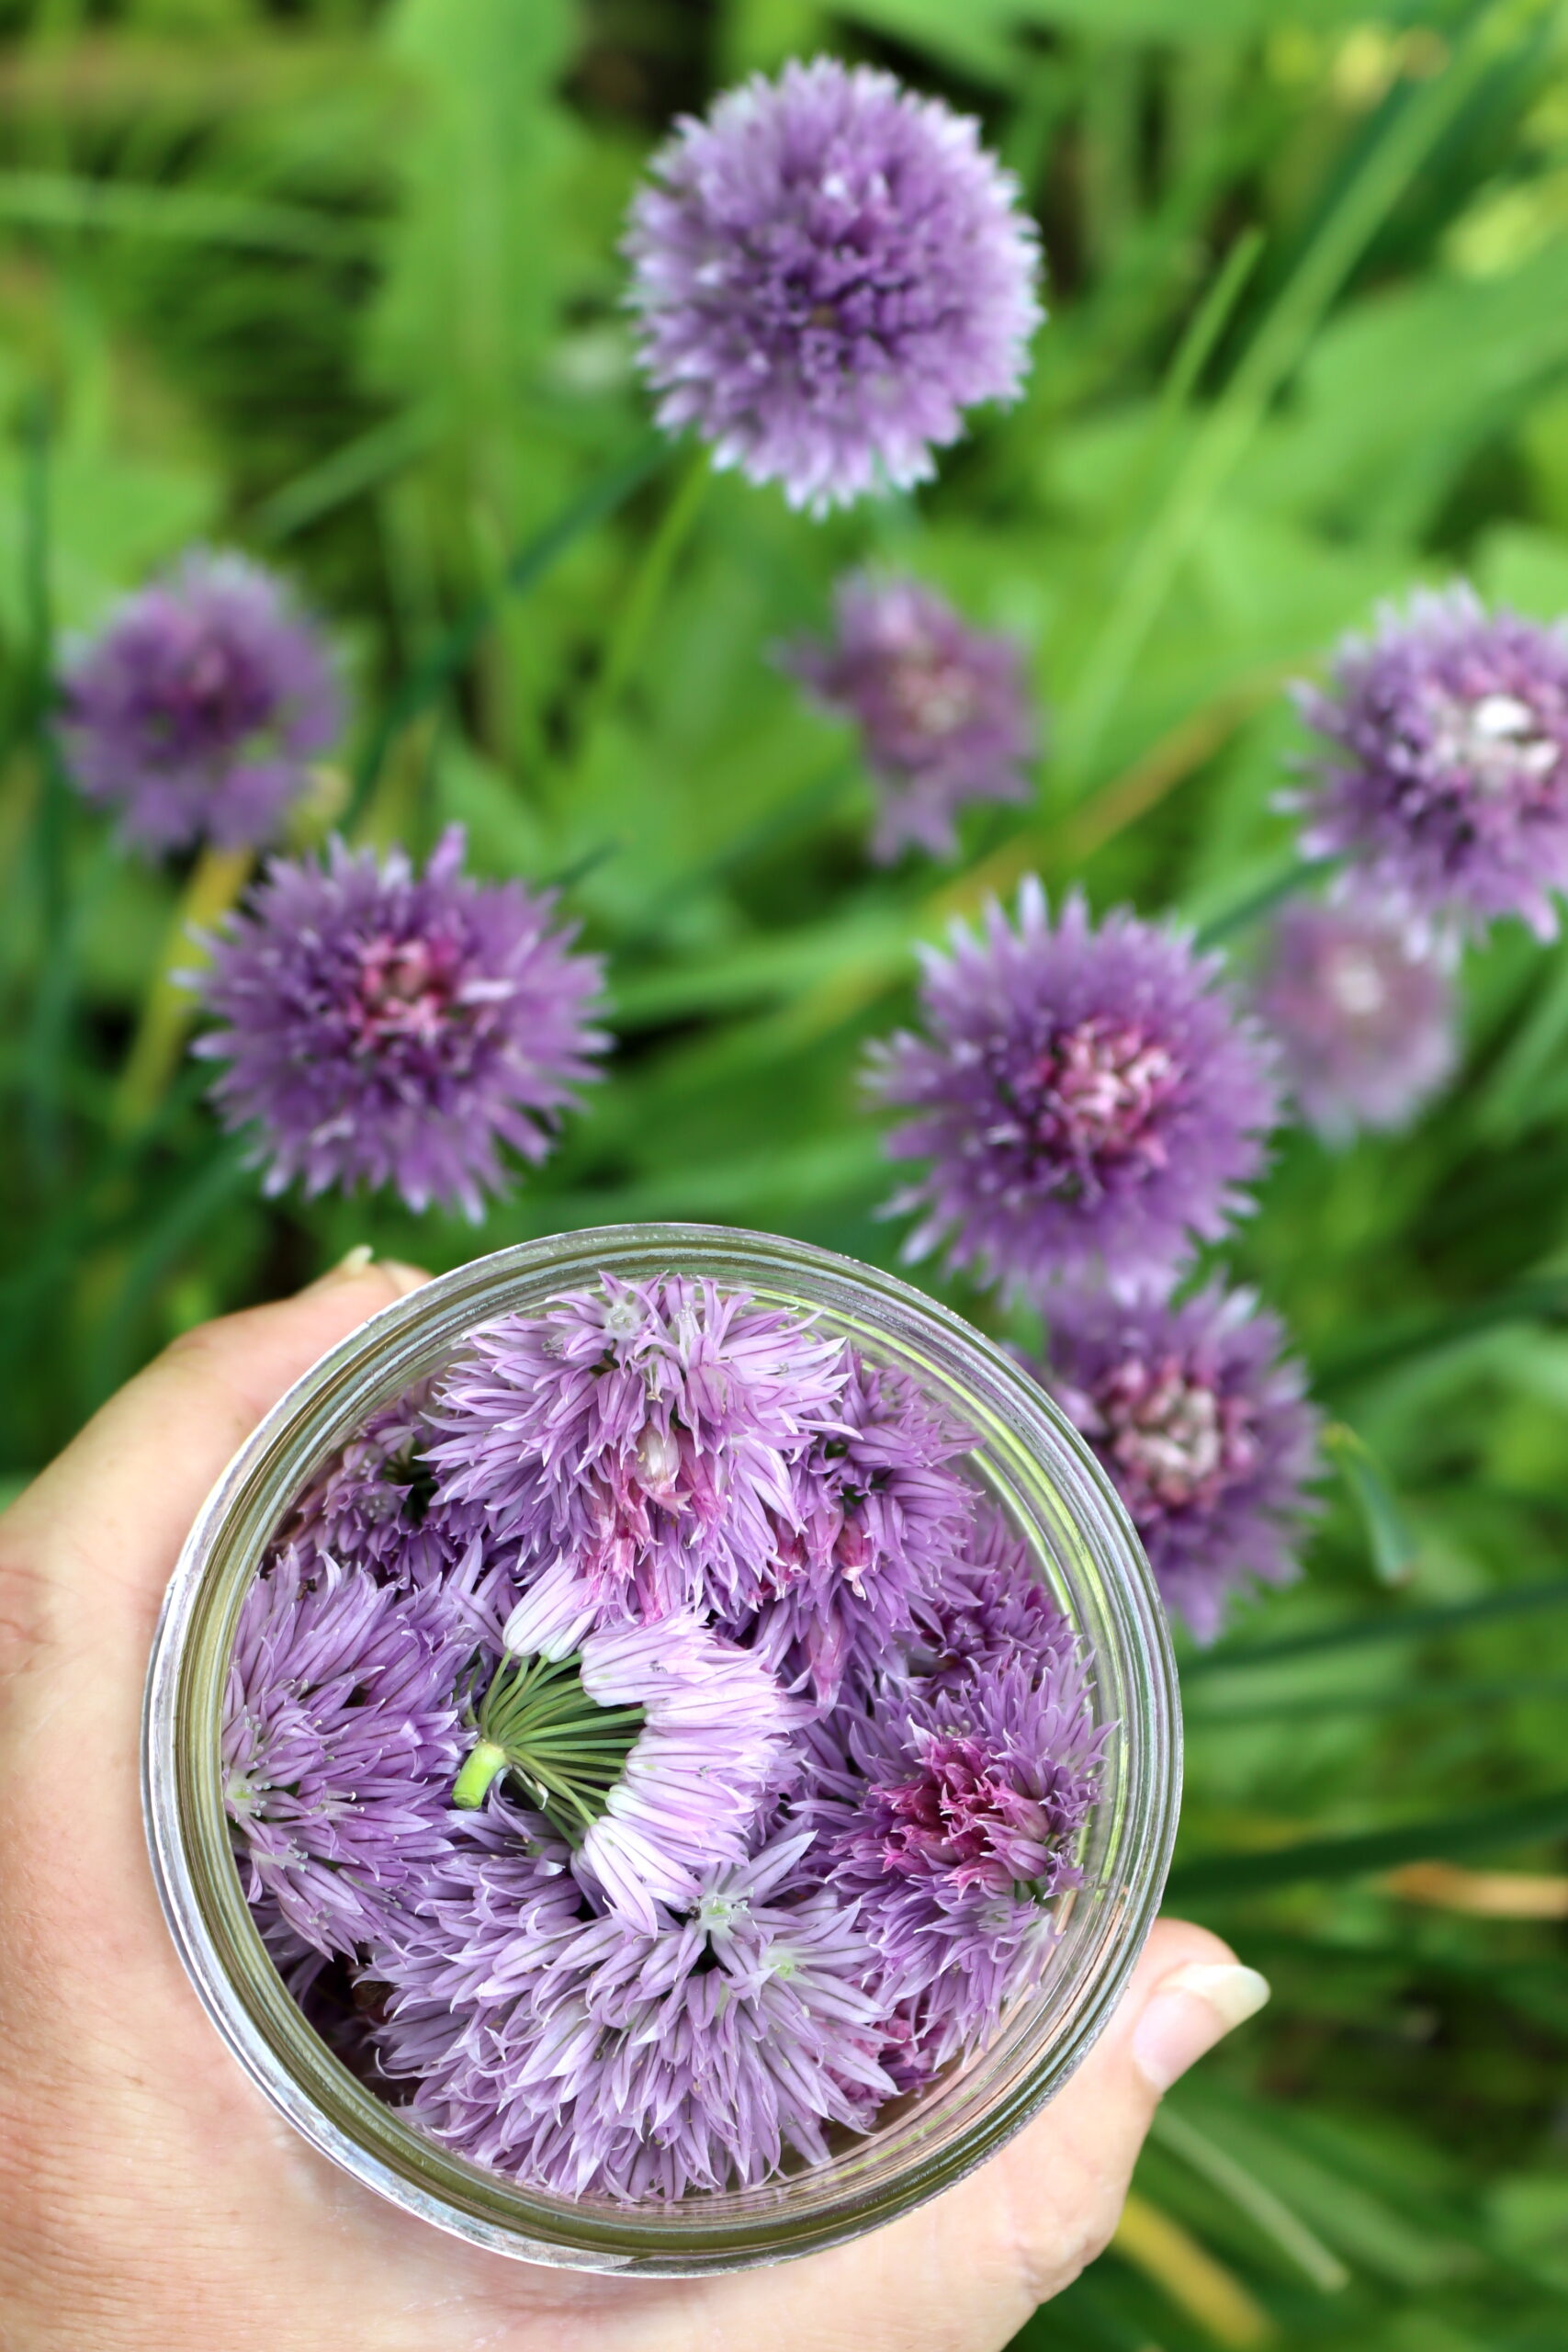 Gathering Chive Blossoms